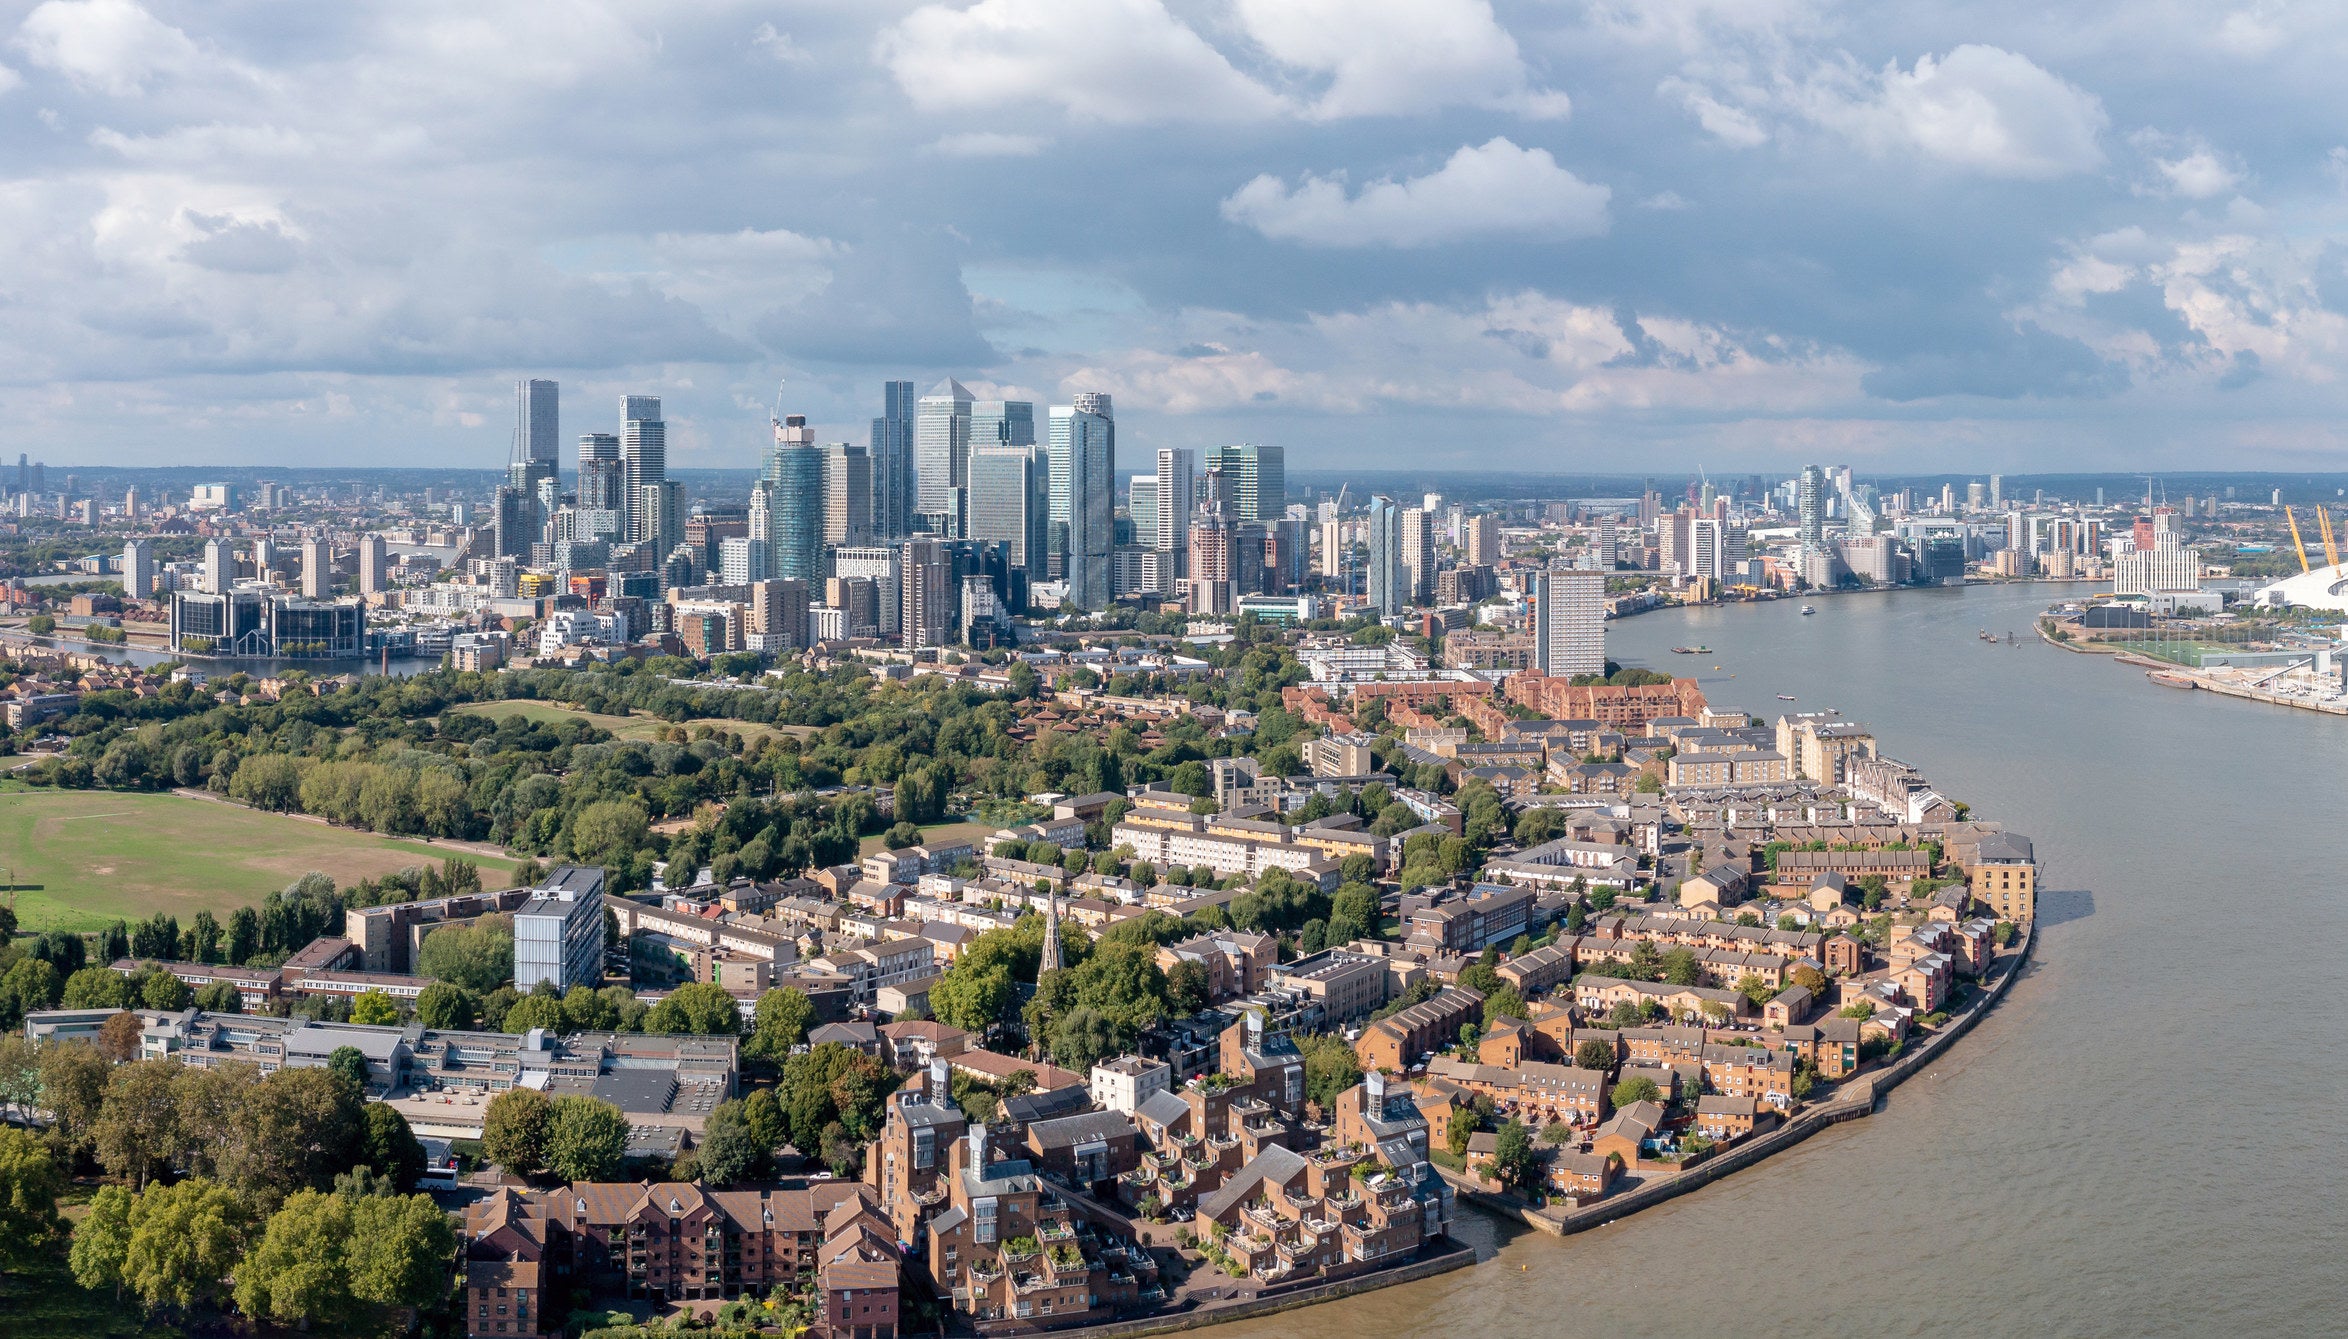 an aerial view of the city of london